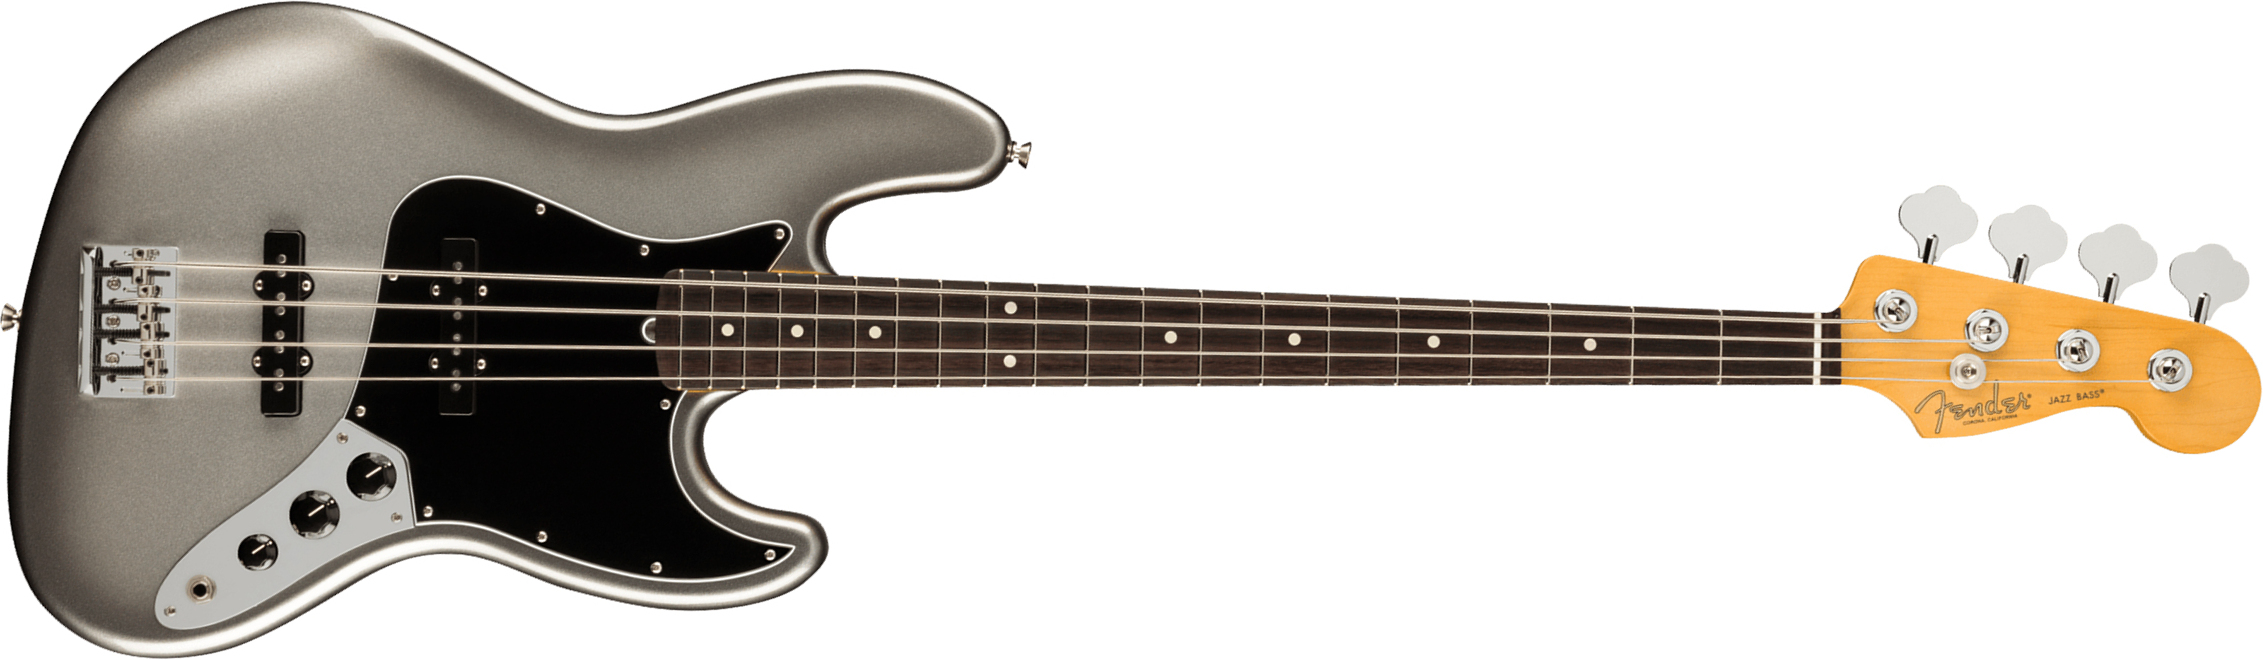 Fender Jazz Bass American Professional Ii Usa Rw - Mercury - Solid body electric bass - Main picture